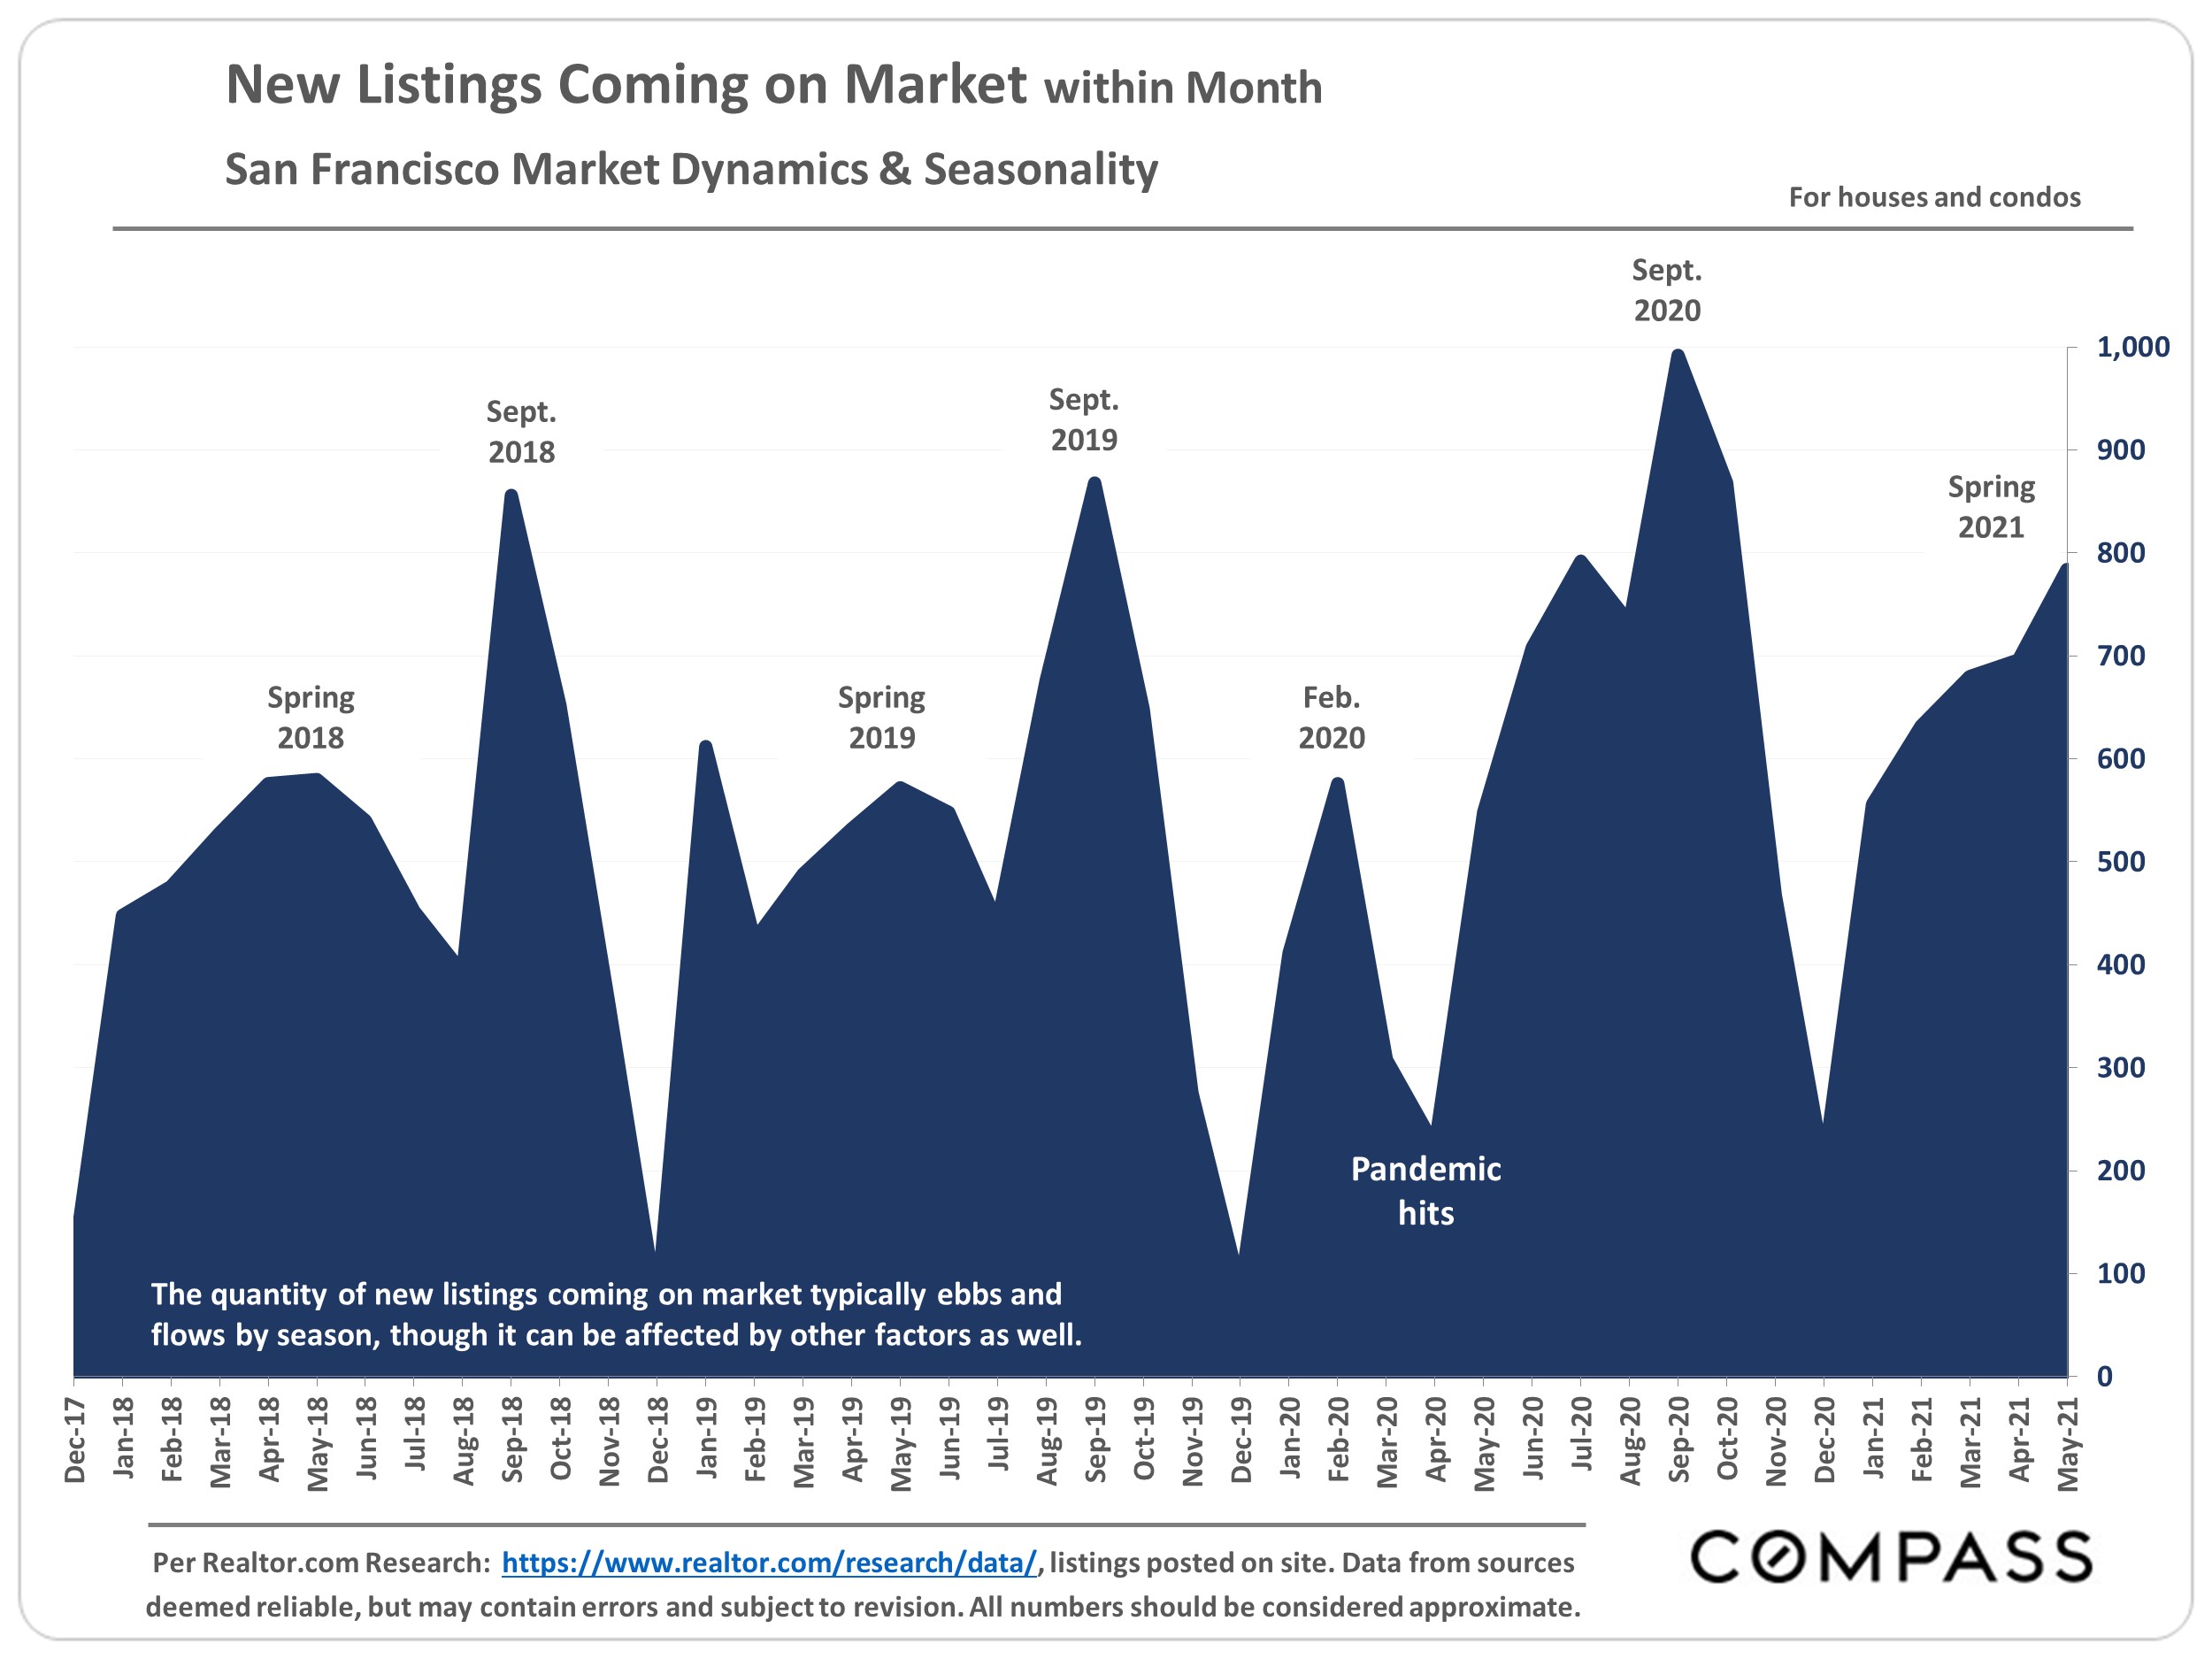 Chart showing theNew Listings on Market within Month, San Francisco Market Dynamics & Seasonality, for houses and condos